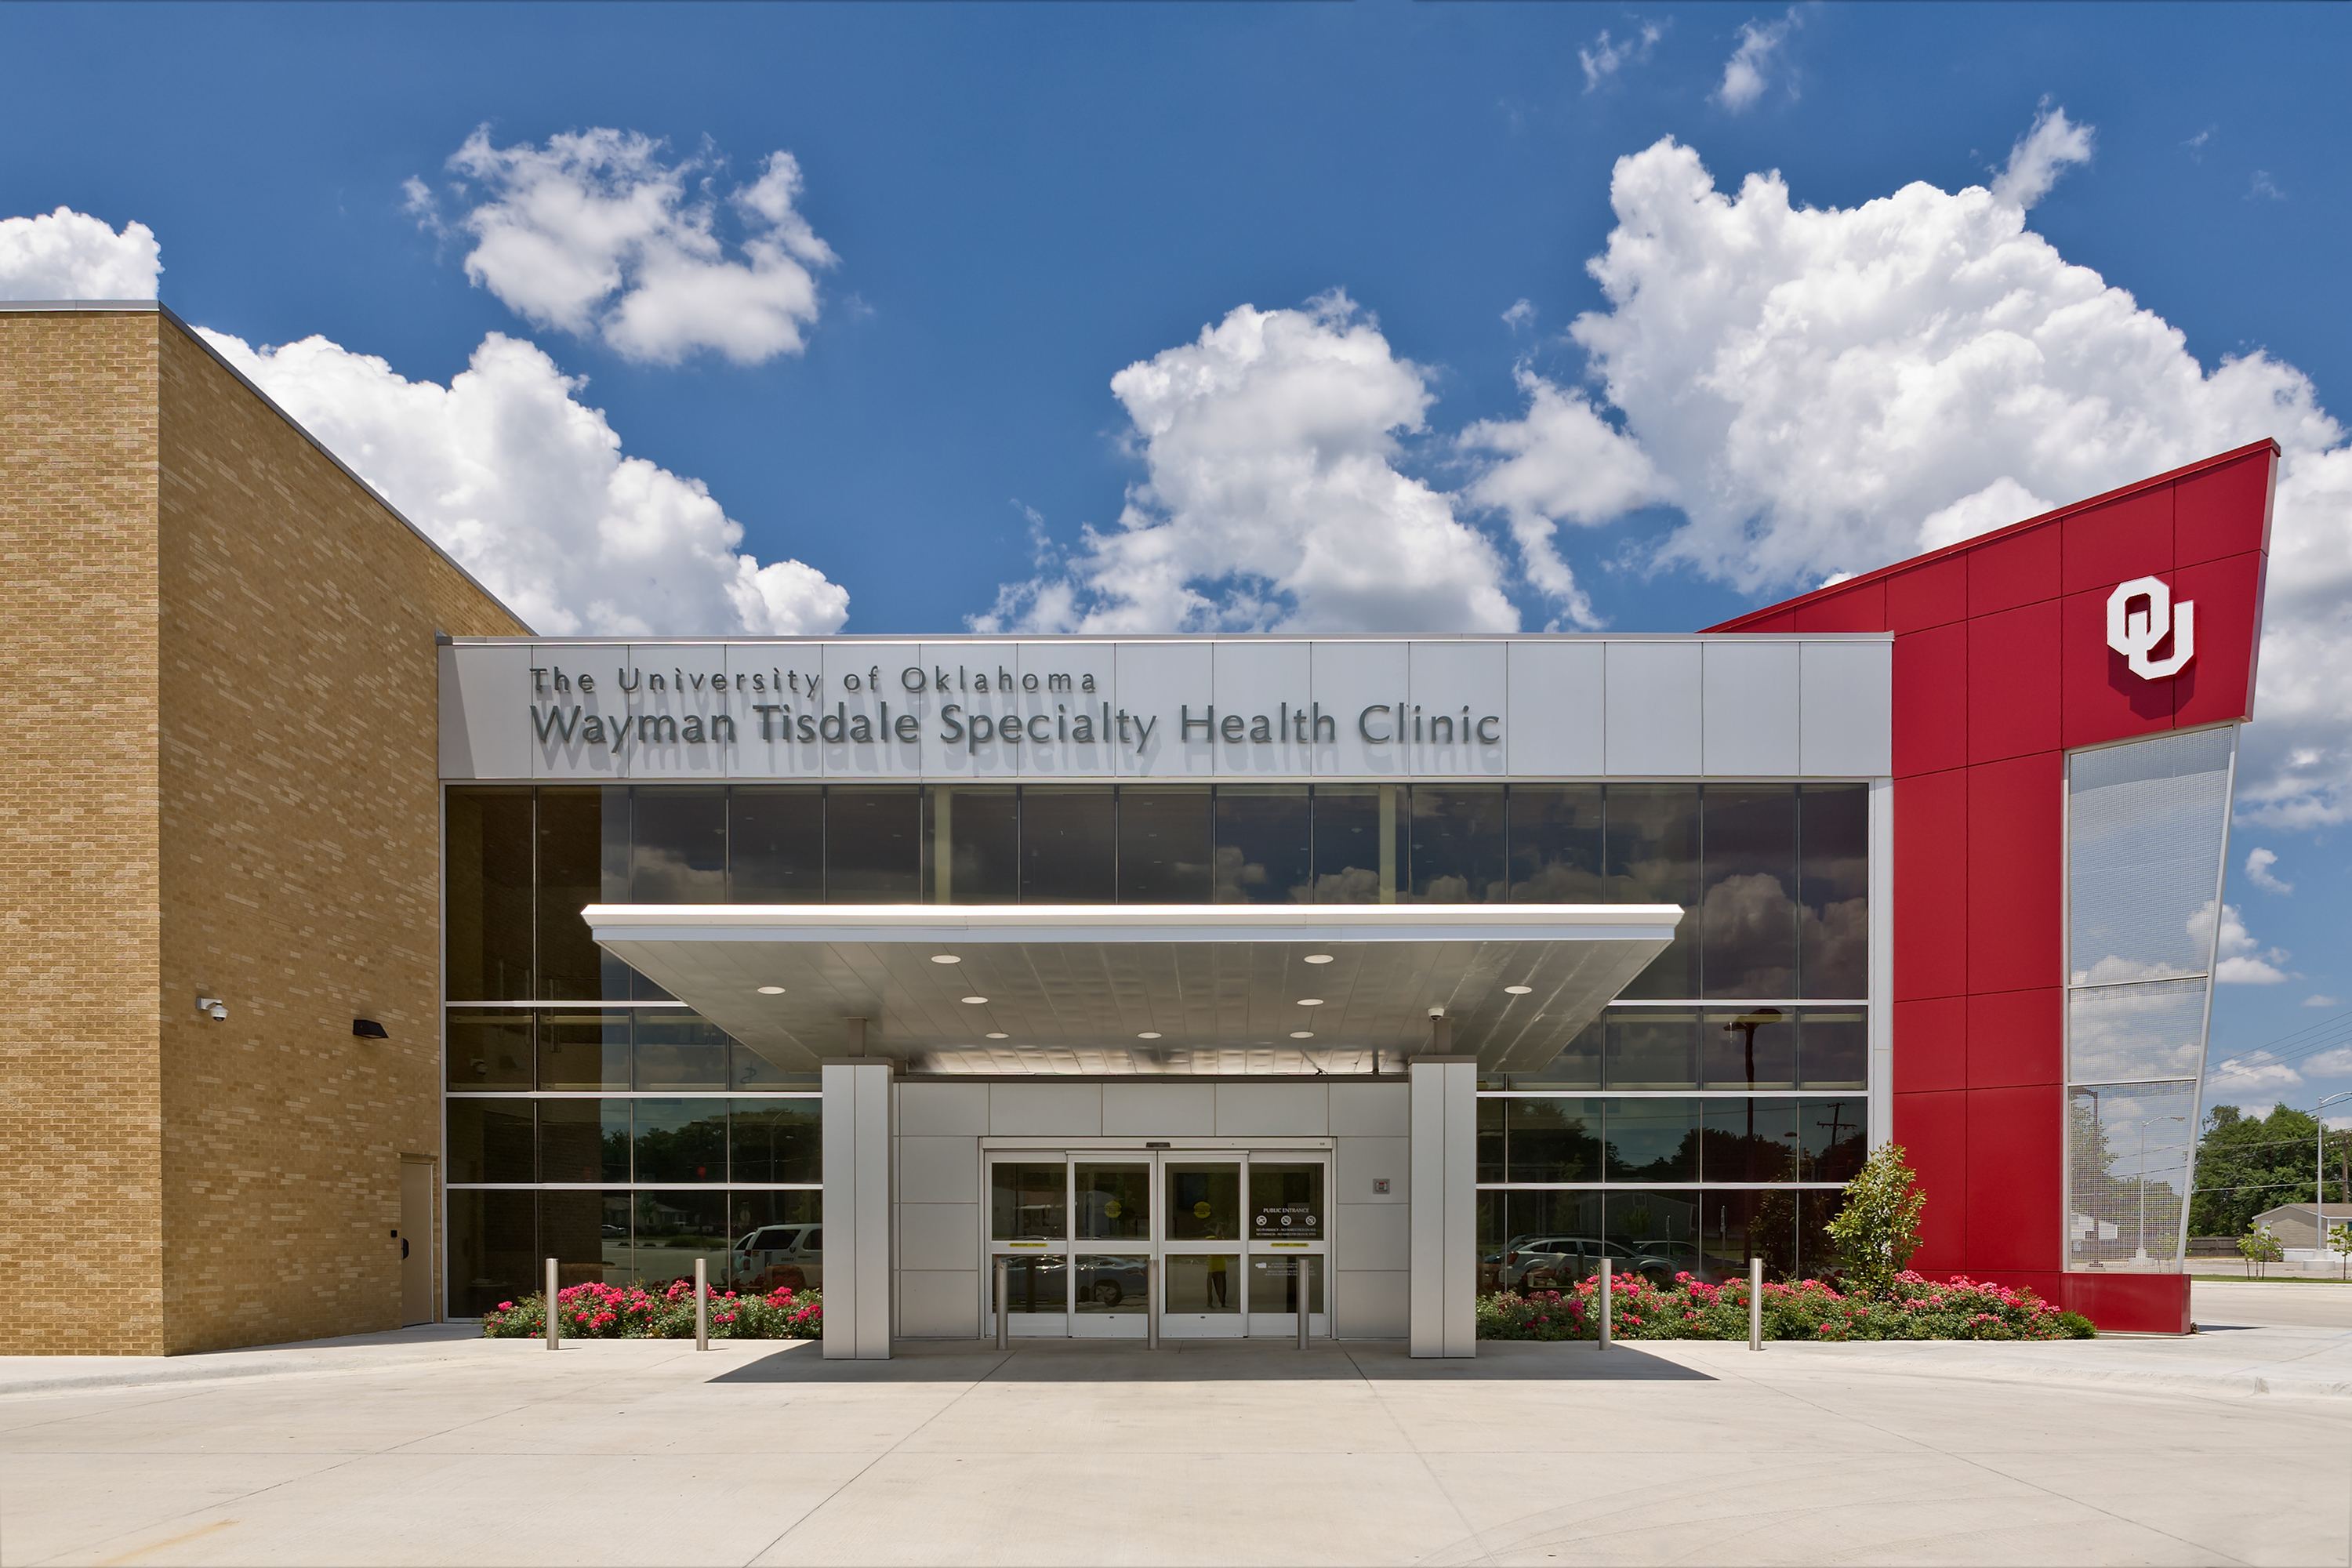 Wayman Tisdale Specialty Health Clinic - Wallace Engineering3000 x 2000